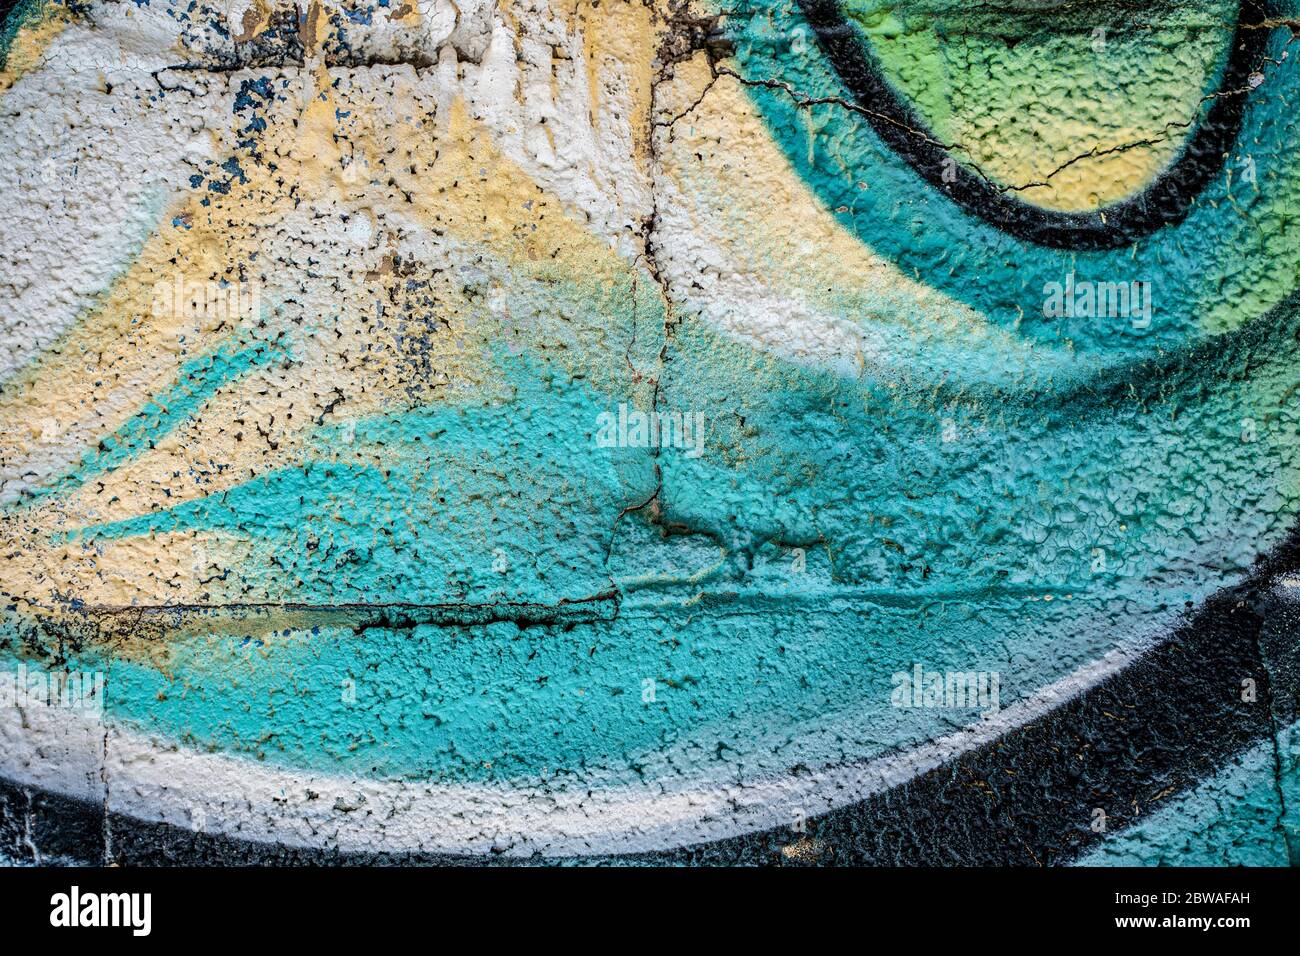 Graffiti close-up on concrete block wall texture. Street art background. Green, yellow and white. Stock Photo